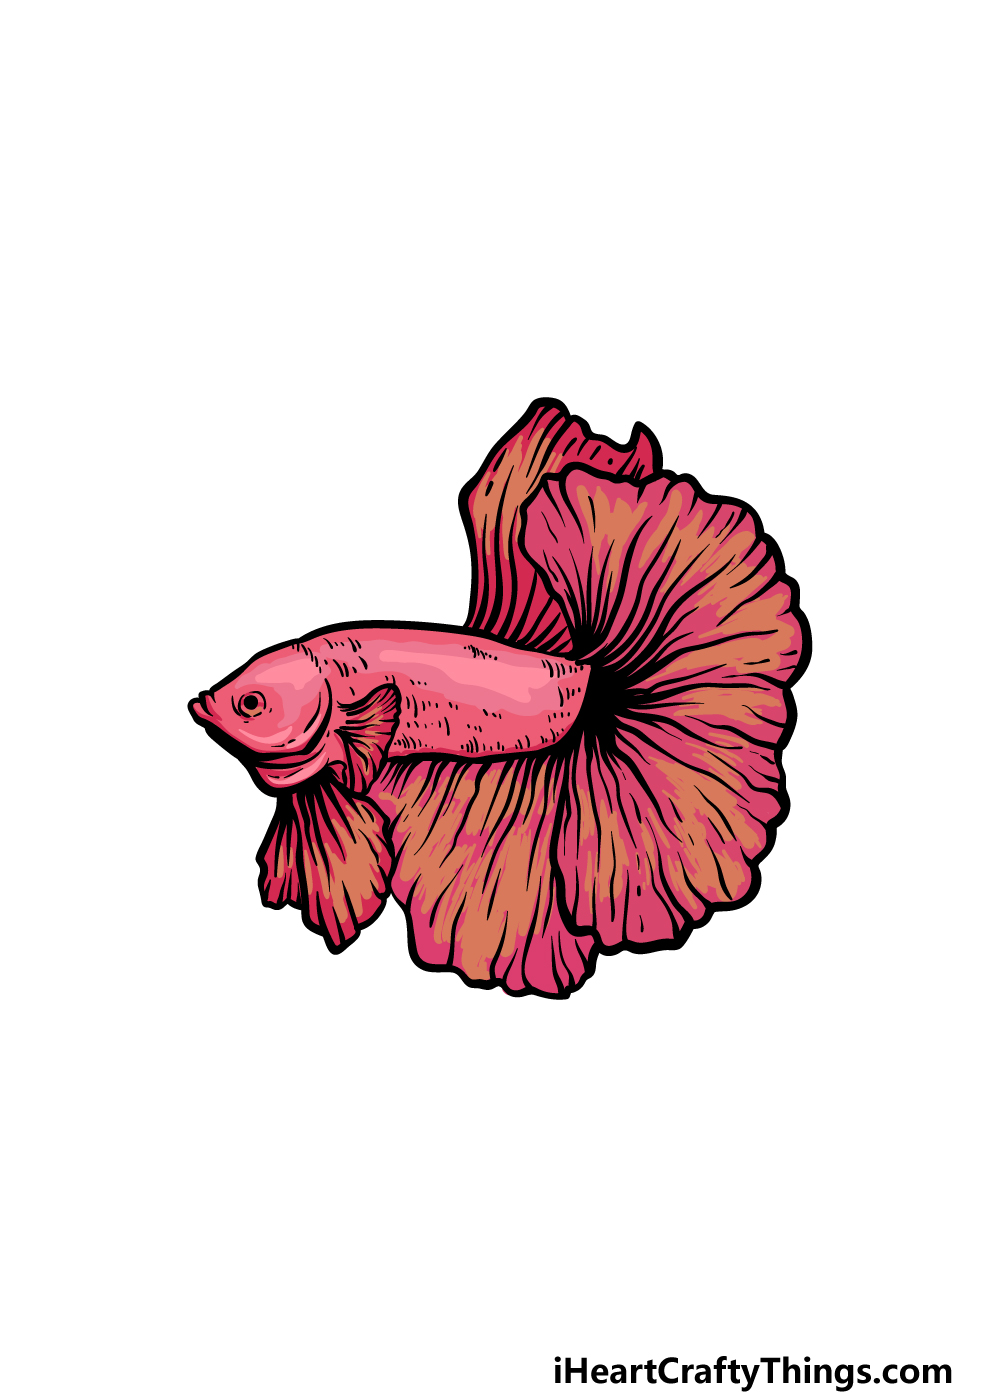 How To Draw A Betta Fish – A Step by Step Guide